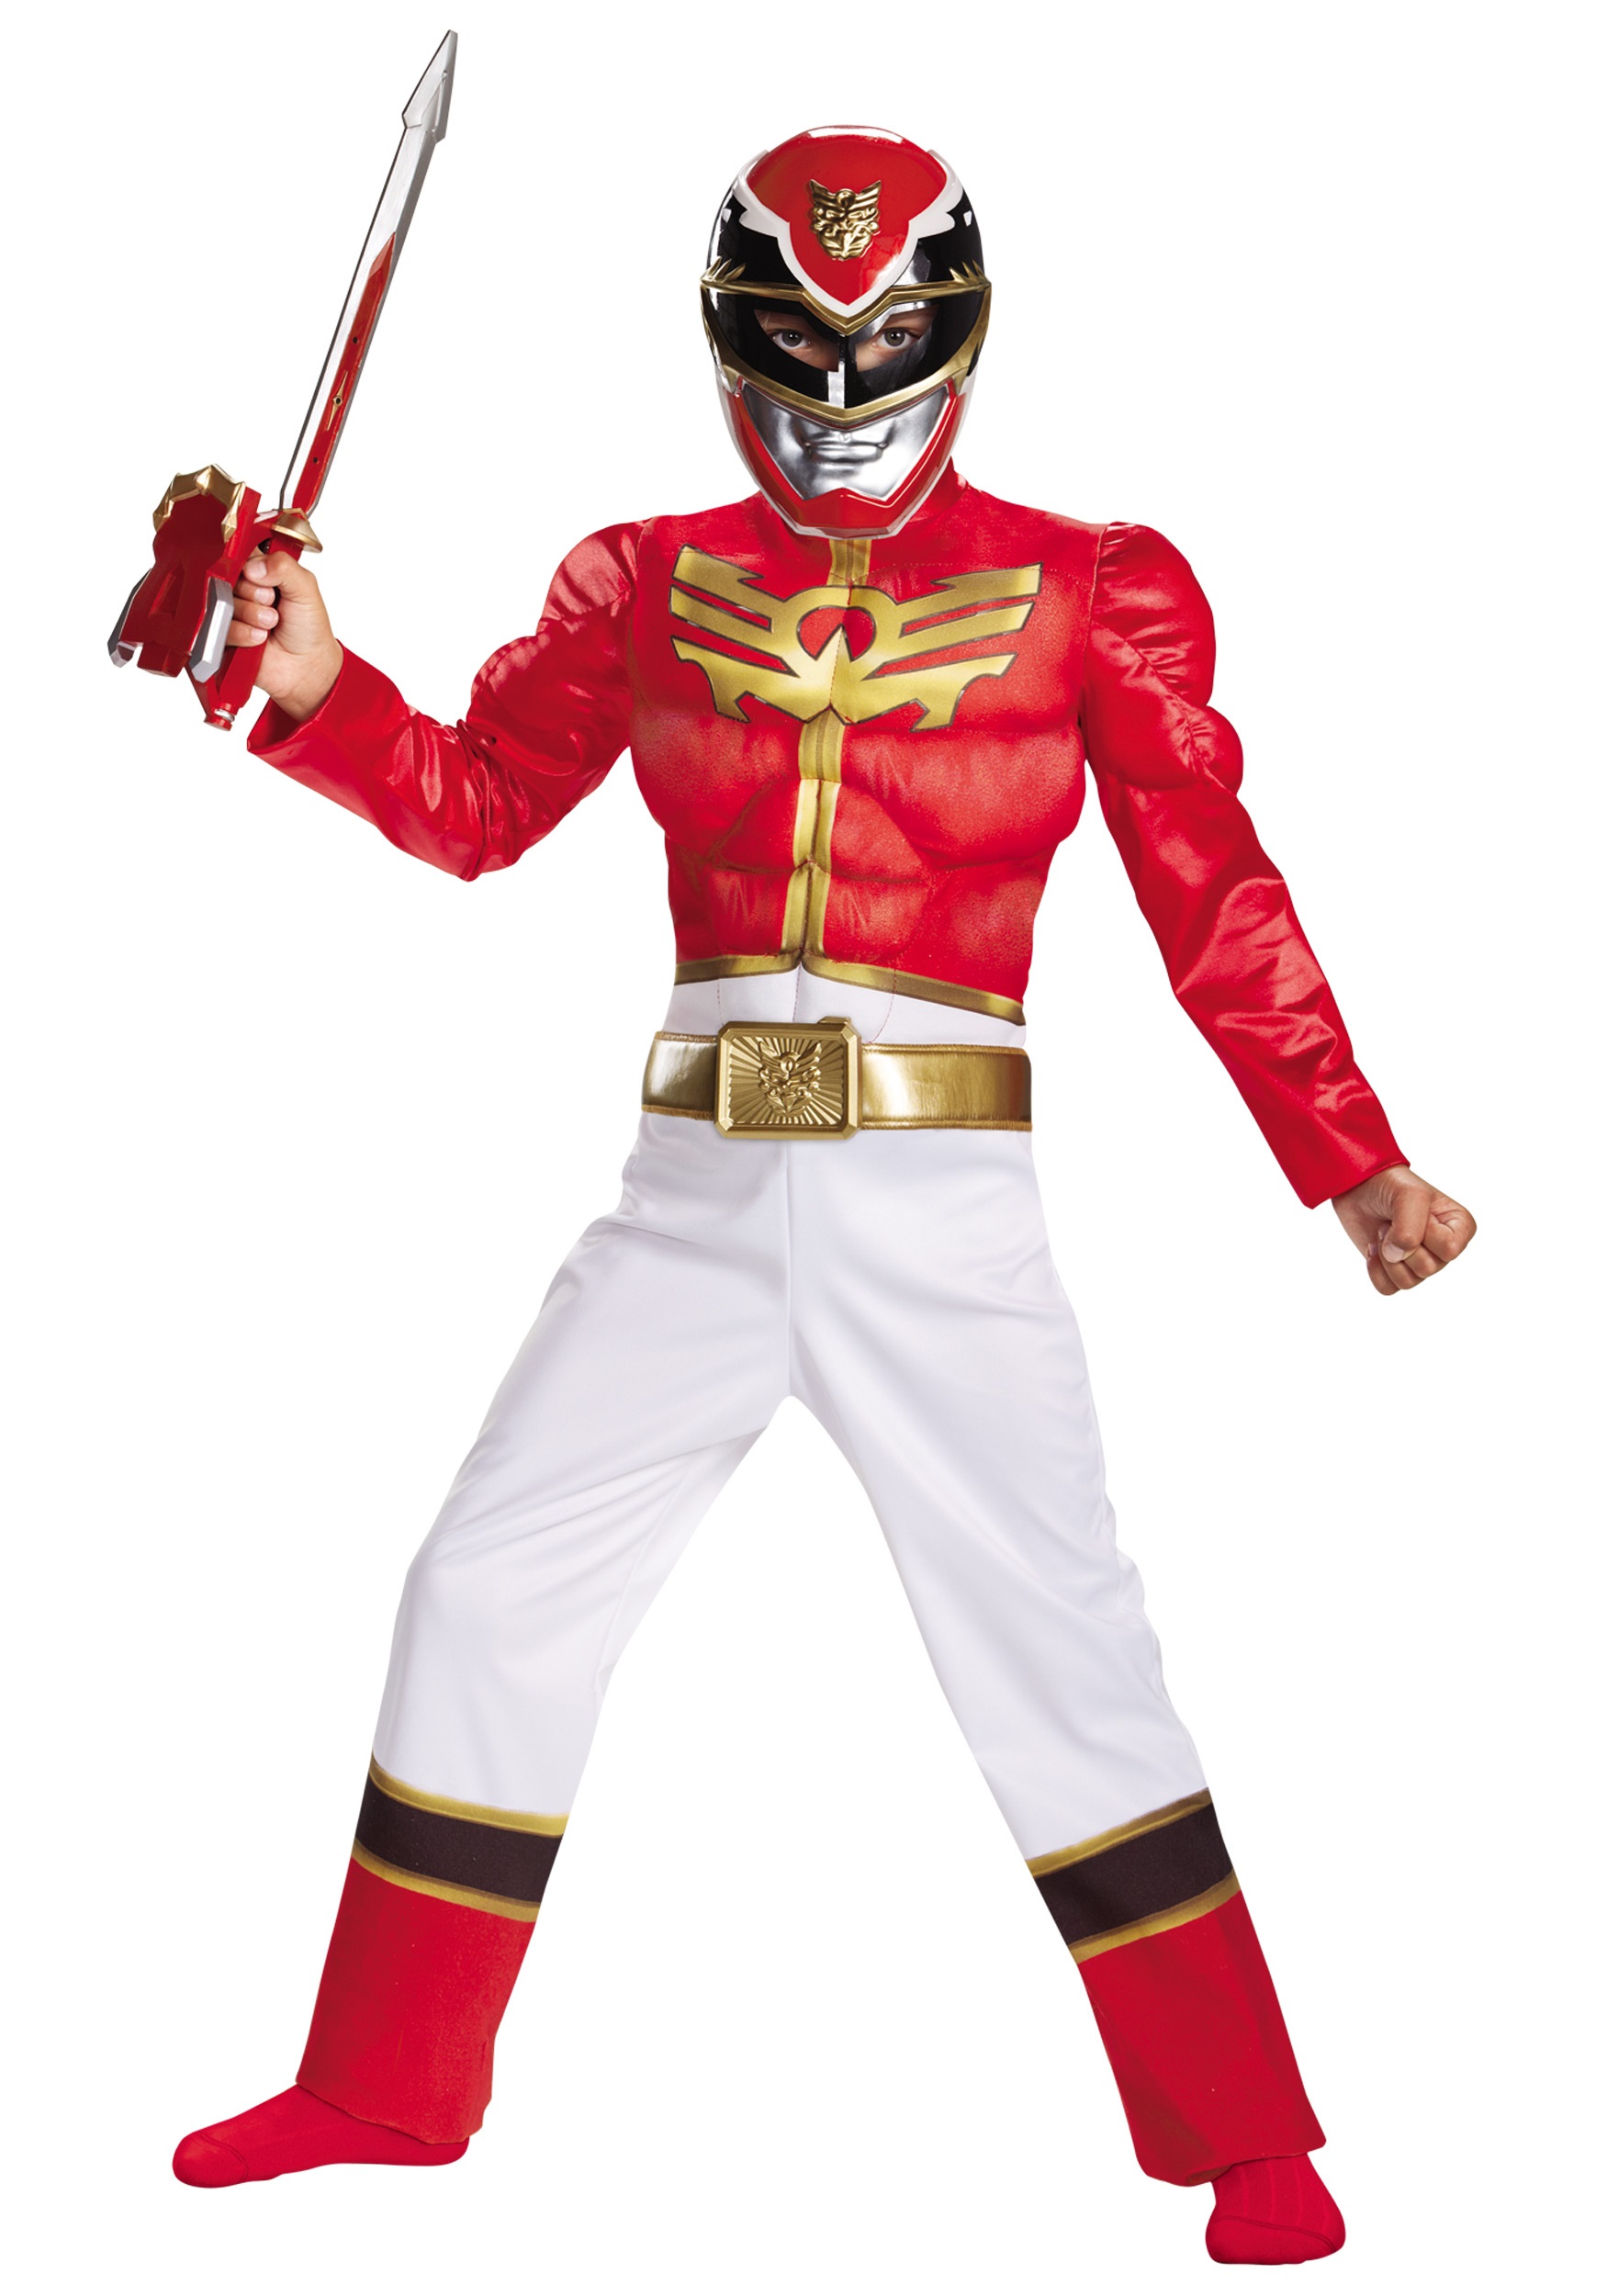 This Boys Red Ranger Megaforce Classic Muscle Costume is the perfect Power Rang...